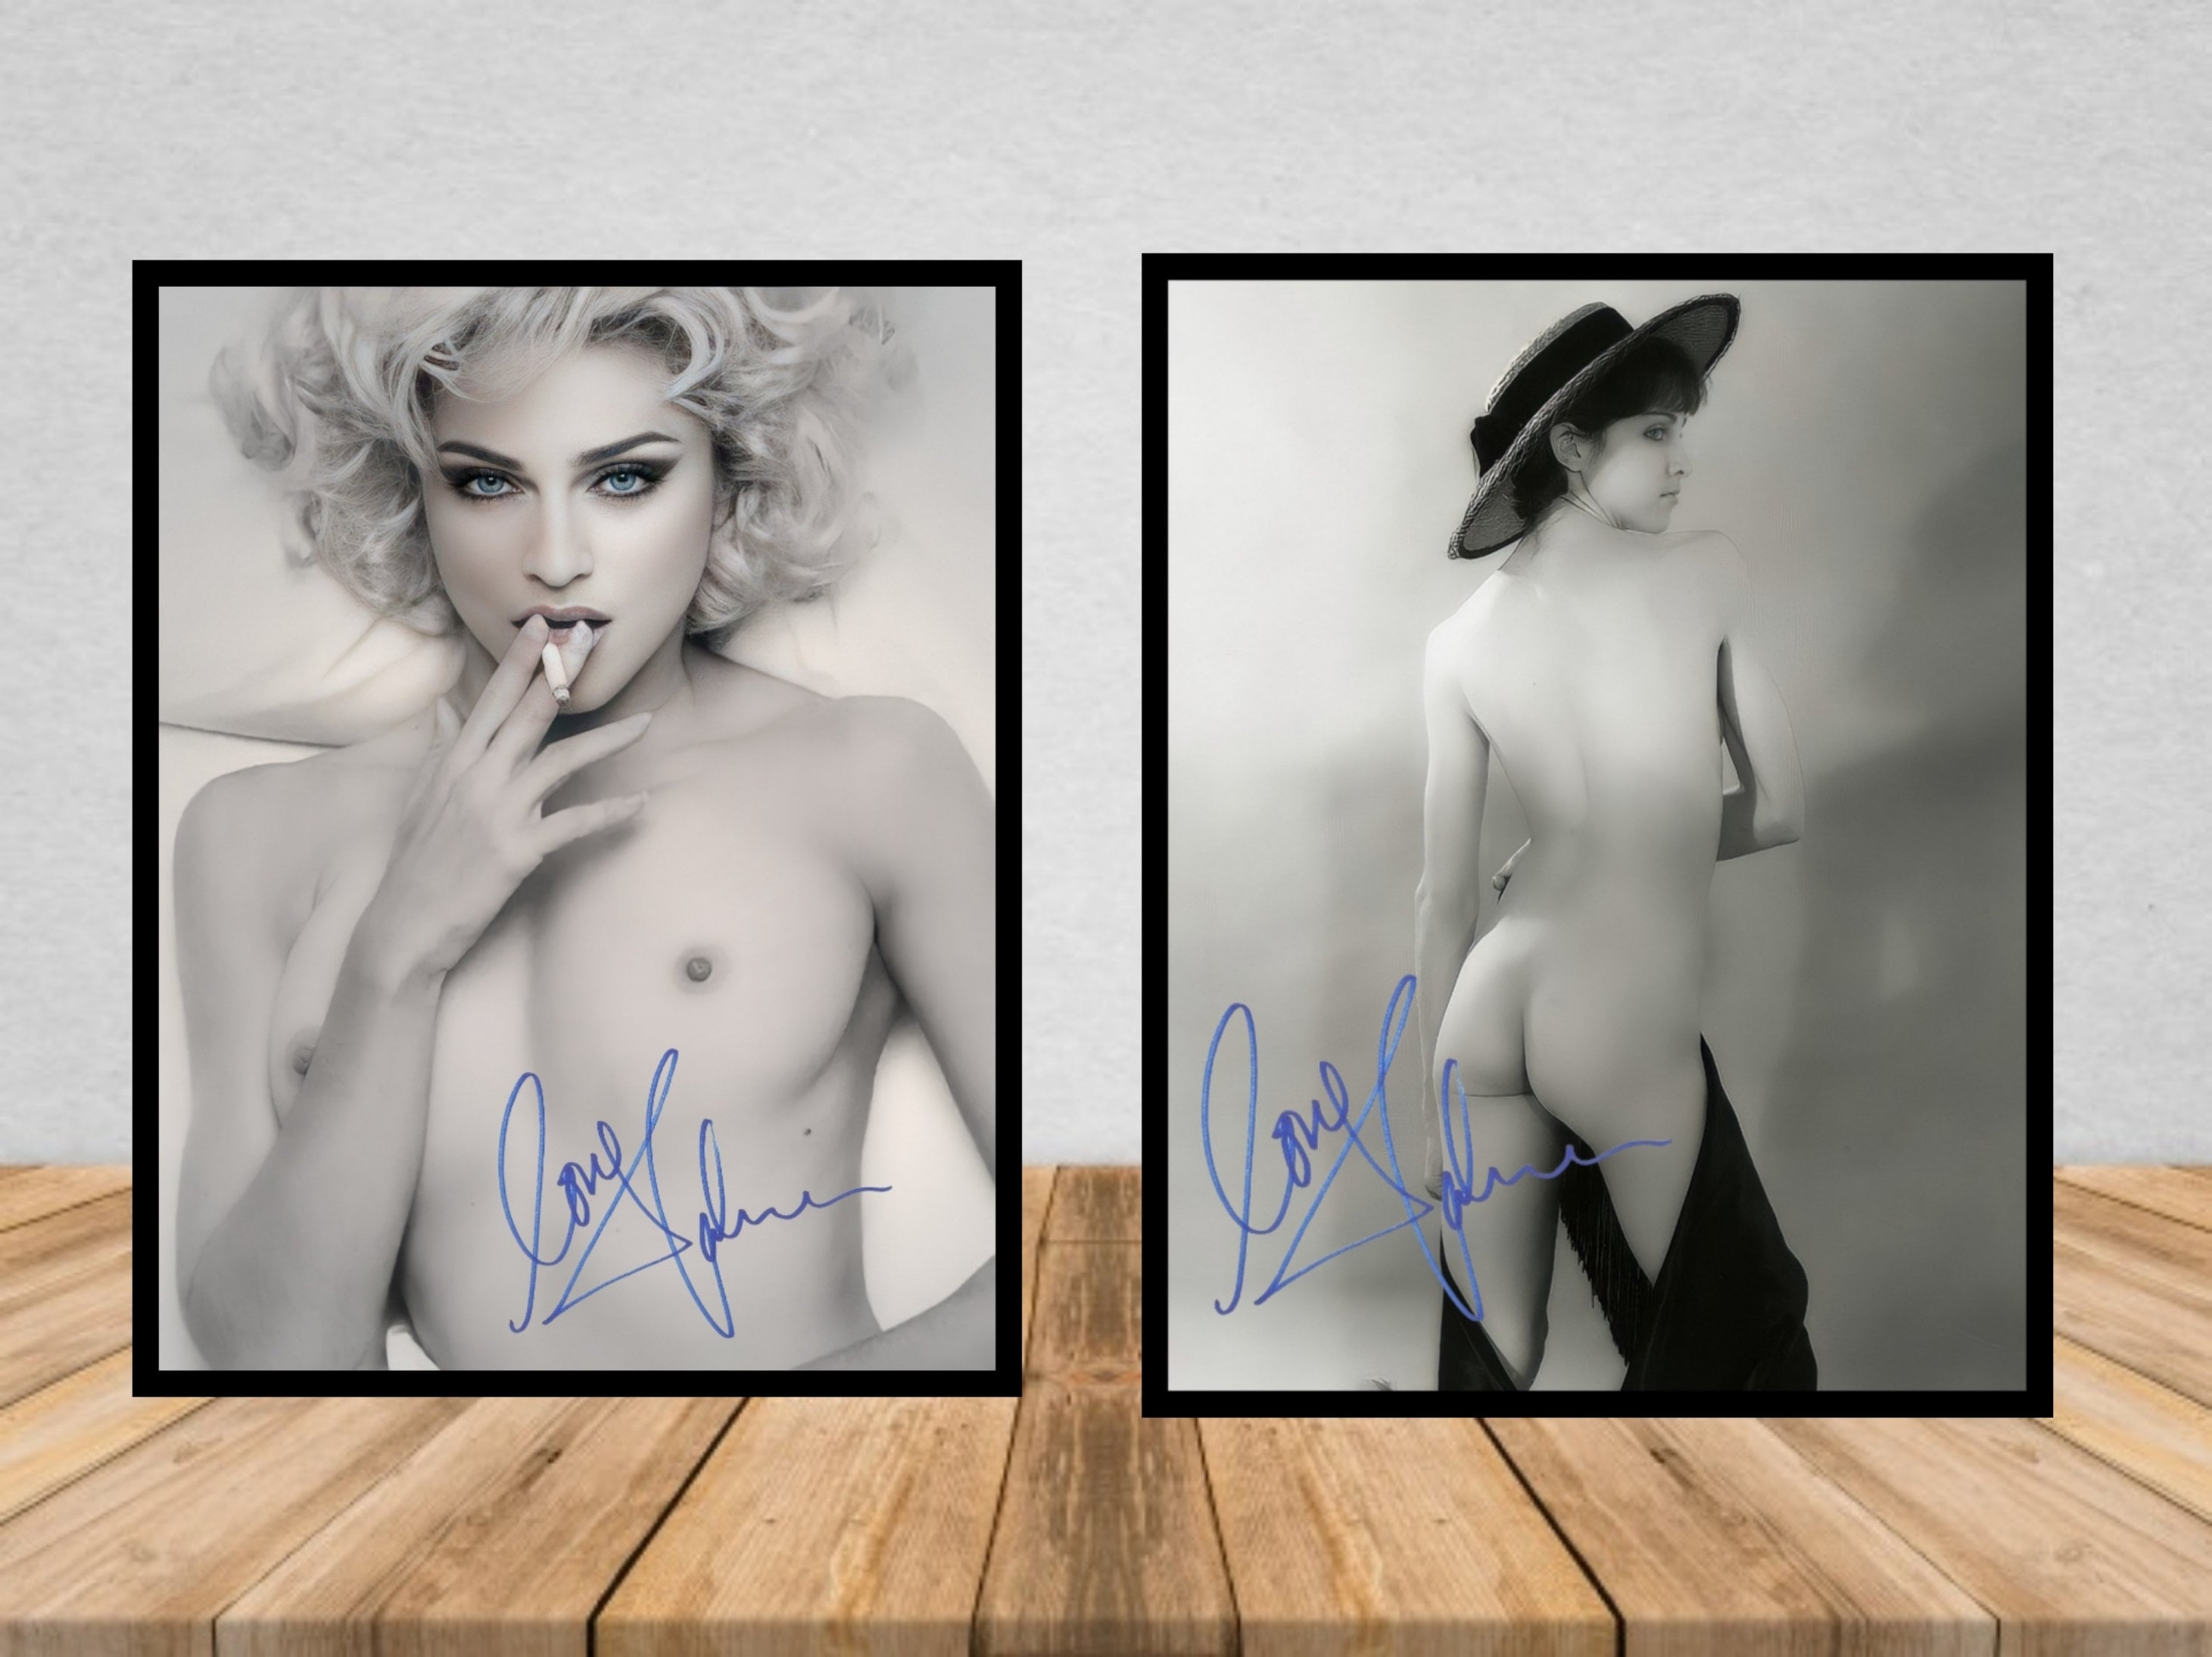 Black Madonna Porn - Madonna Nude Back and Front Black and White Autograph Reprint - Etsy Finland